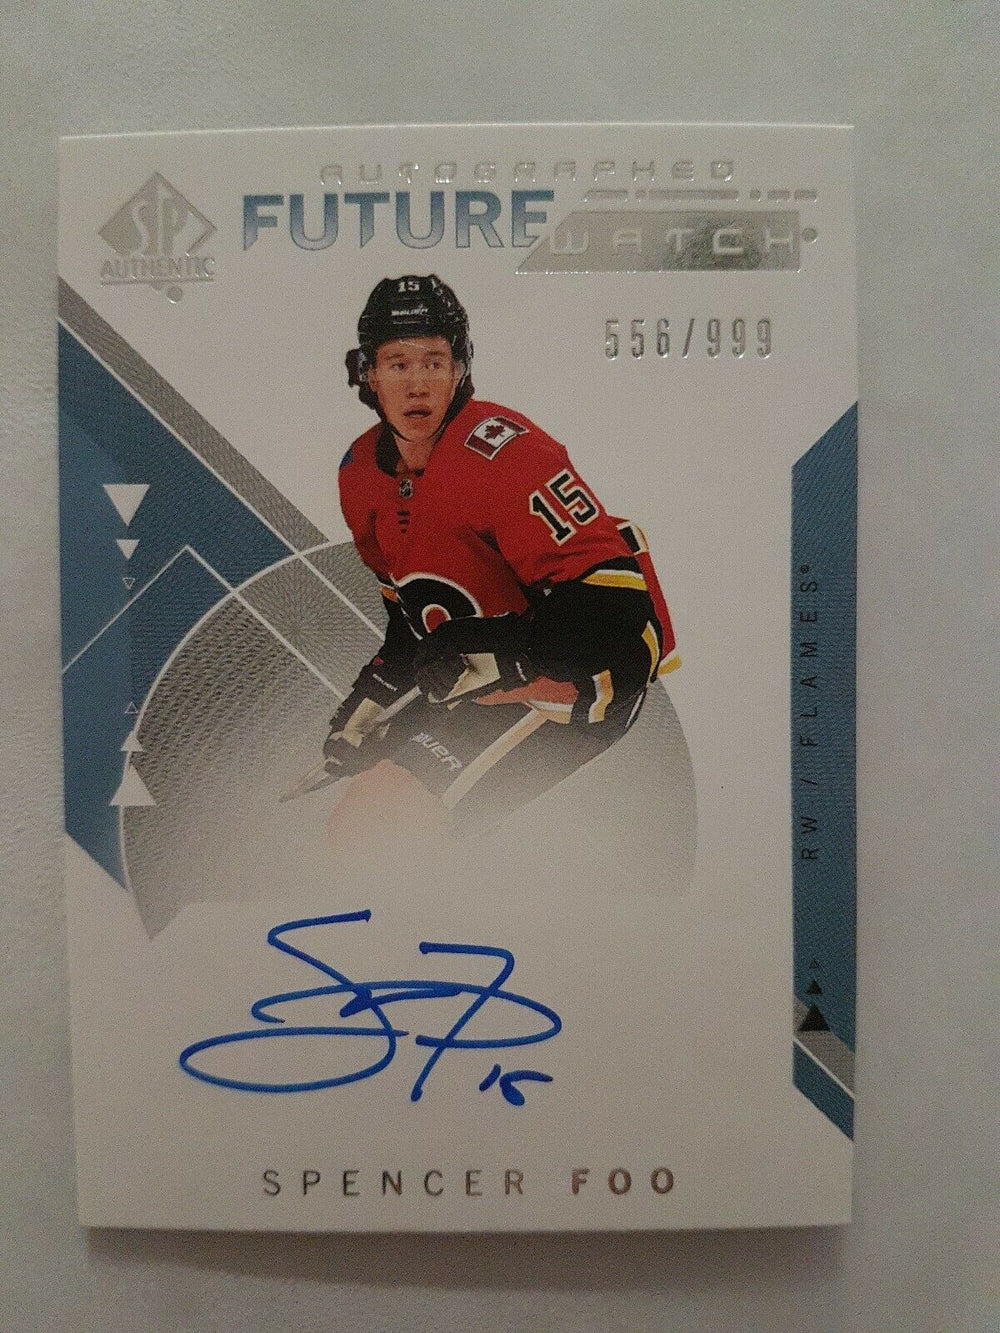 2018-19 SP Authentic Auto Future Watch #168 Spencer Foo Calgary Flames 556/999